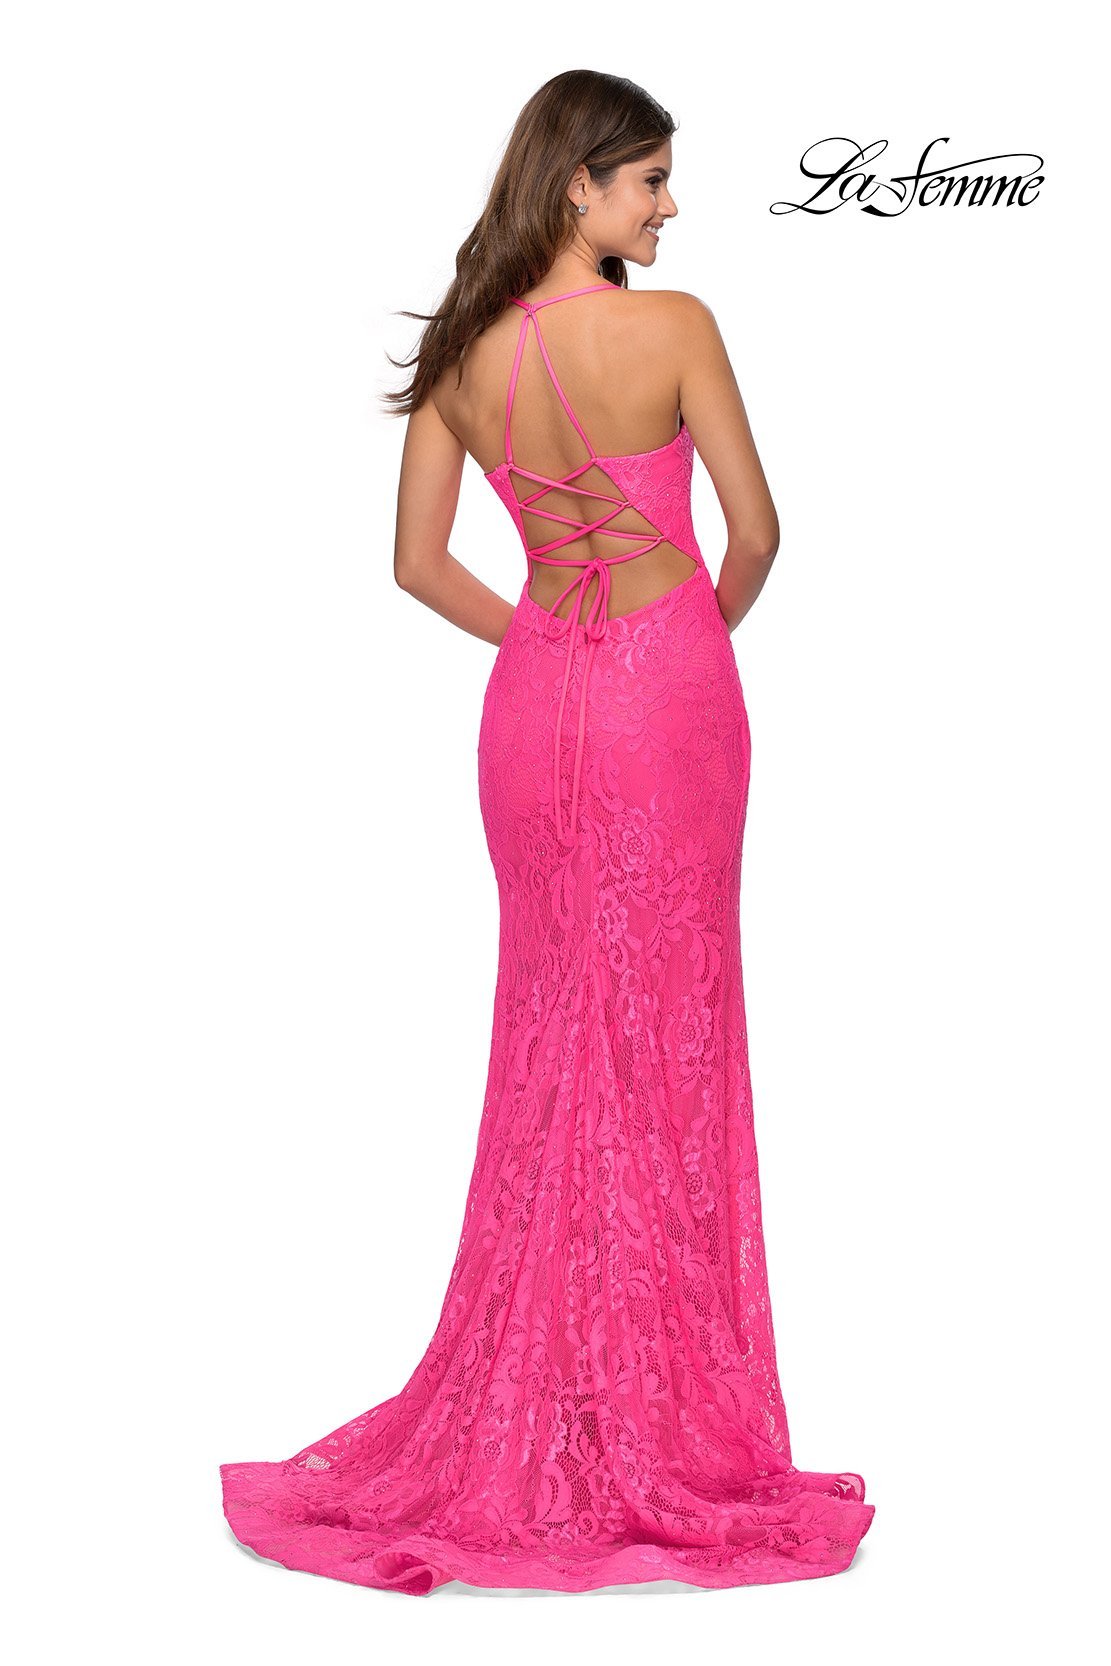 La Femme 28548 dress images in these colors: Emerald, Neon Pink, Pale Yellow, Red, Royal Blue.